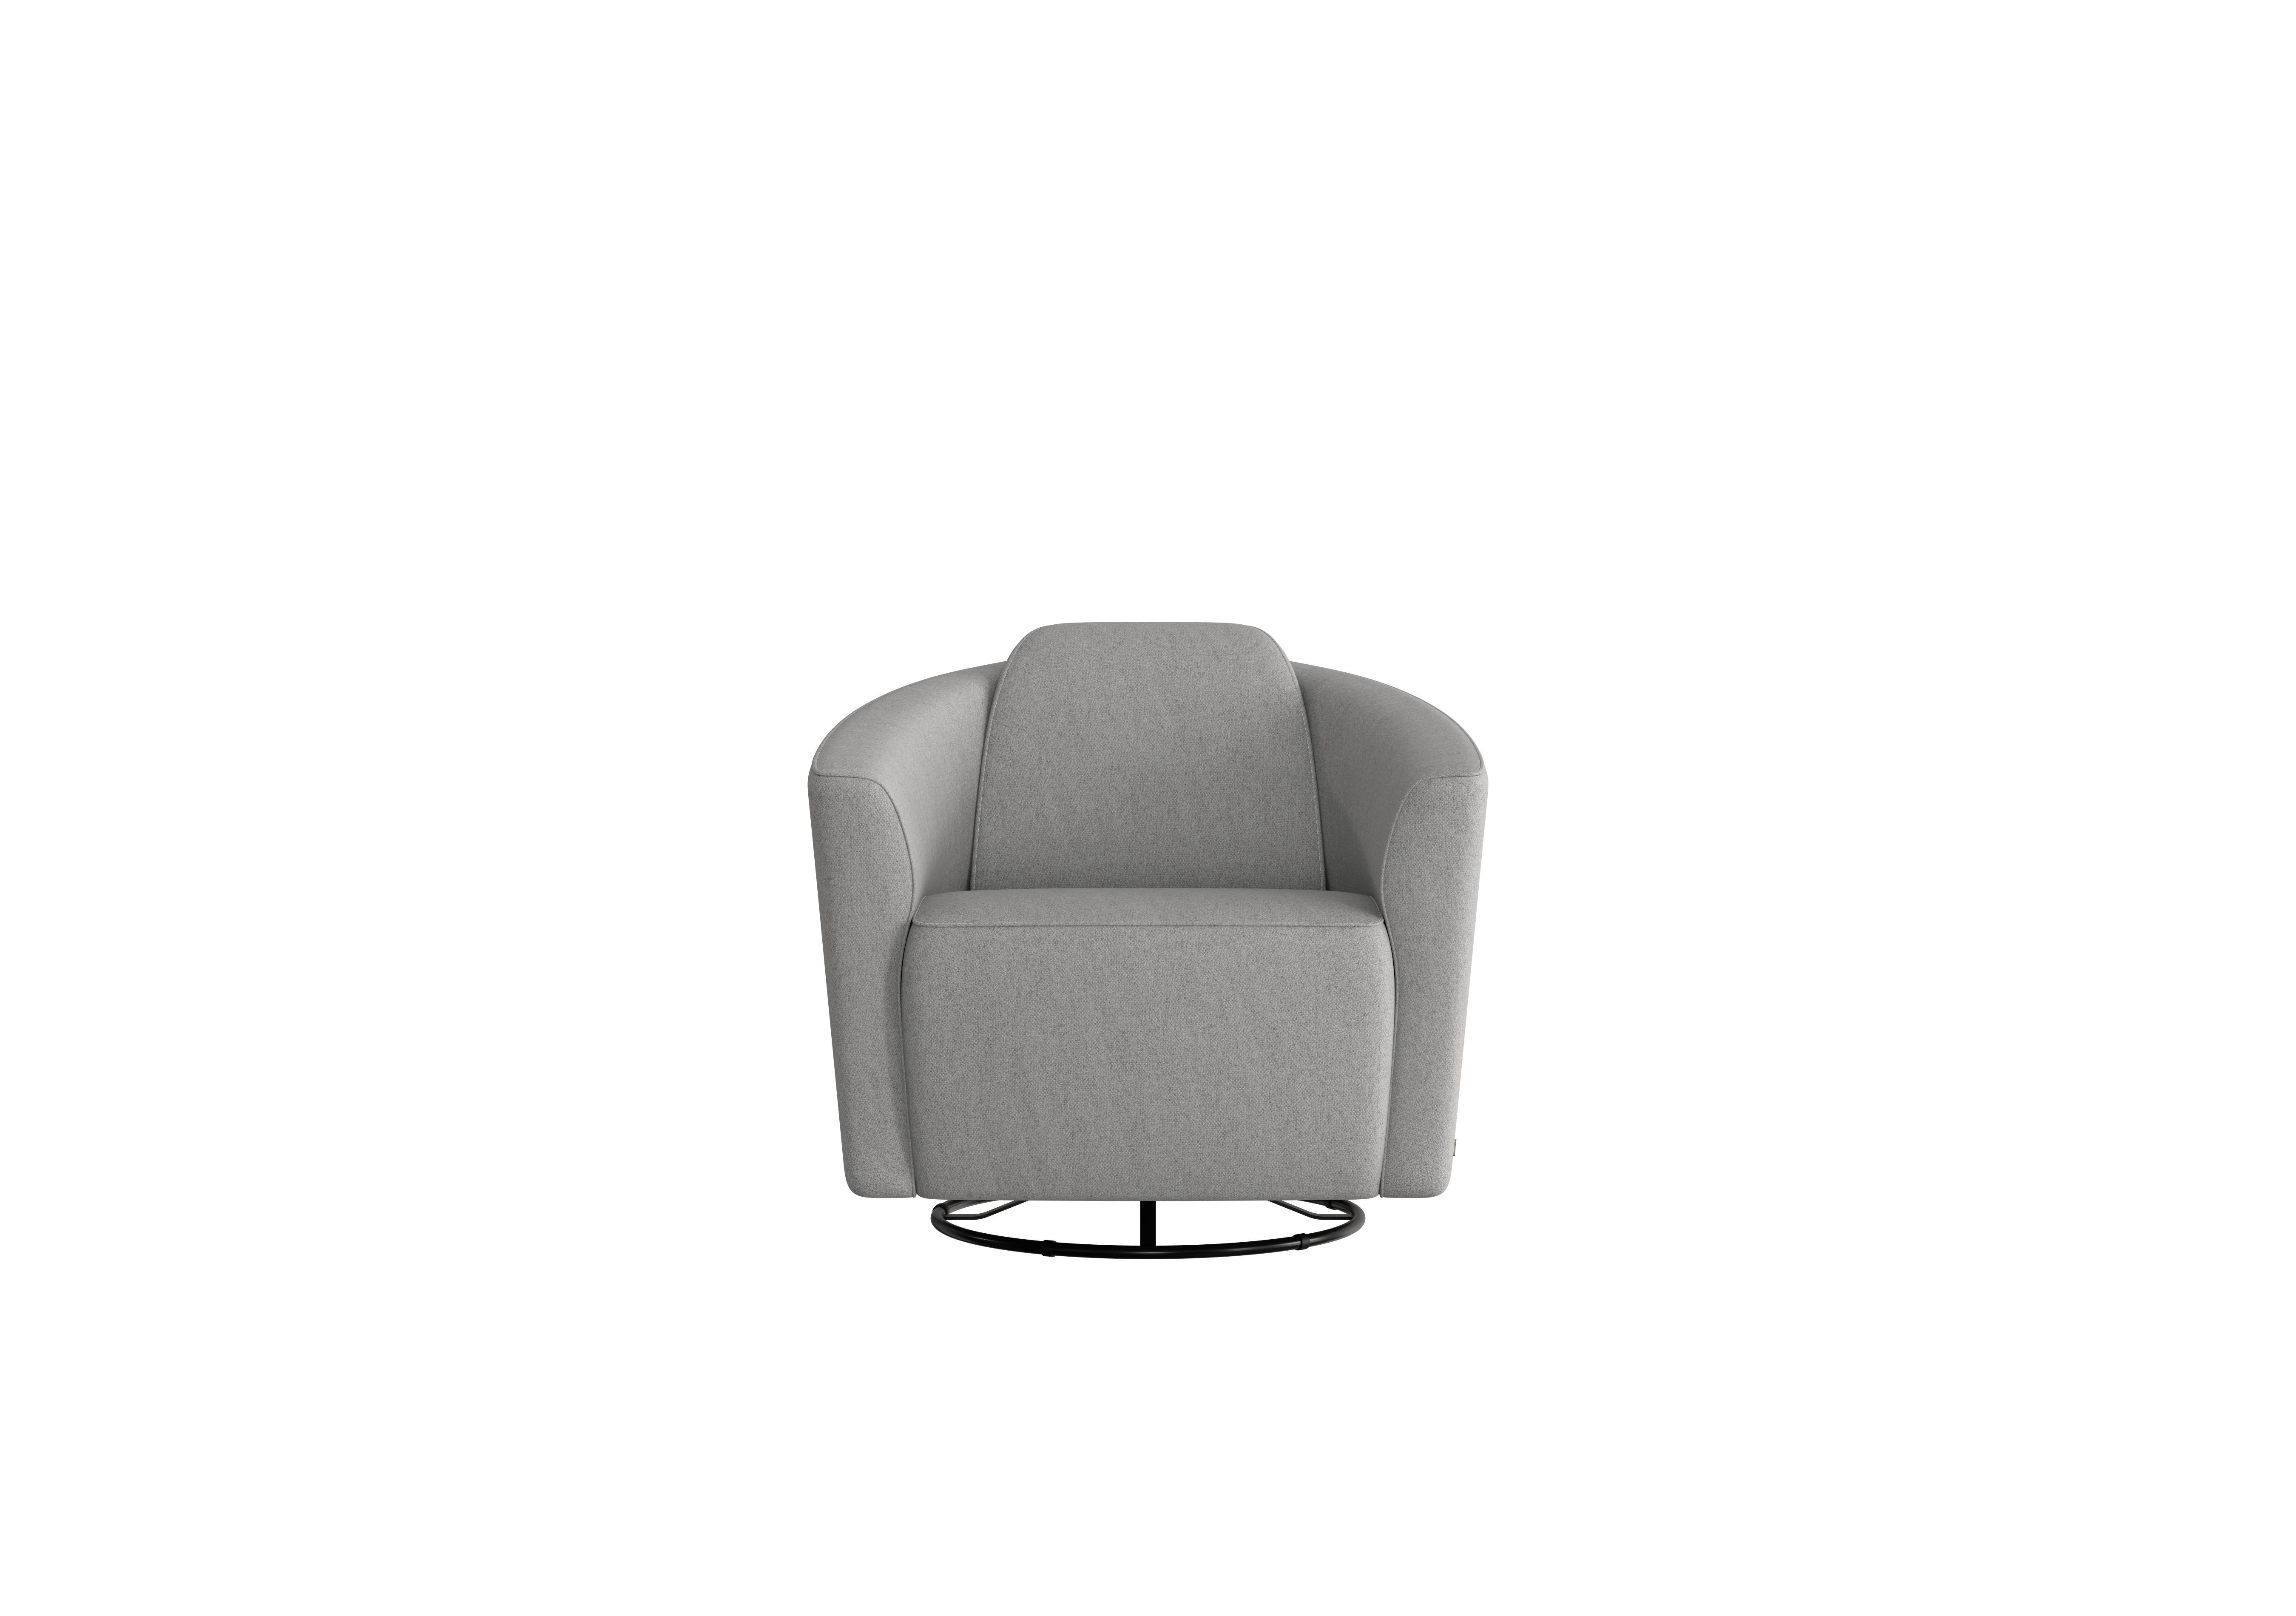 Ketty Fabric Swivel Chair in Fuente Ash on Furniture Village